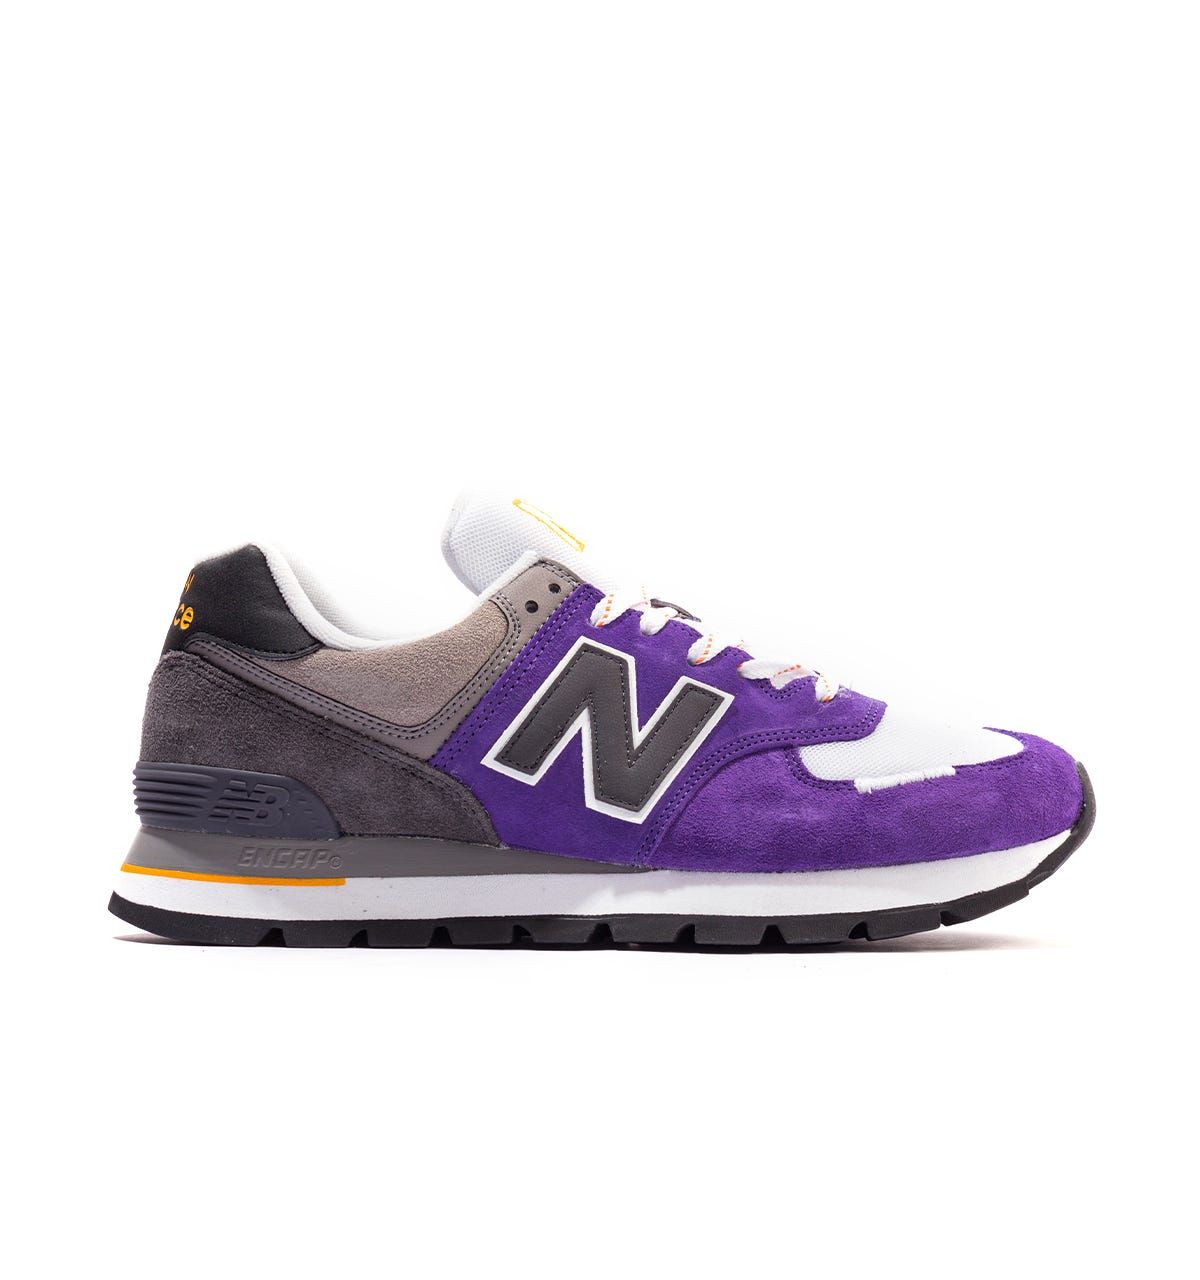 An icon style to New Balance, the 574’s was released as the brands first streetwear offering in 1988. Now redesigned to an even higher quality with a higher grade comfort, this iconic style is recognised by New Balance as their staple style.Men\'s 574 New Balance TrainersSuede UpperTextile LiningTread Rubber OutsoleENCAP TechnologyLace-up ClosureNew Balance Branding